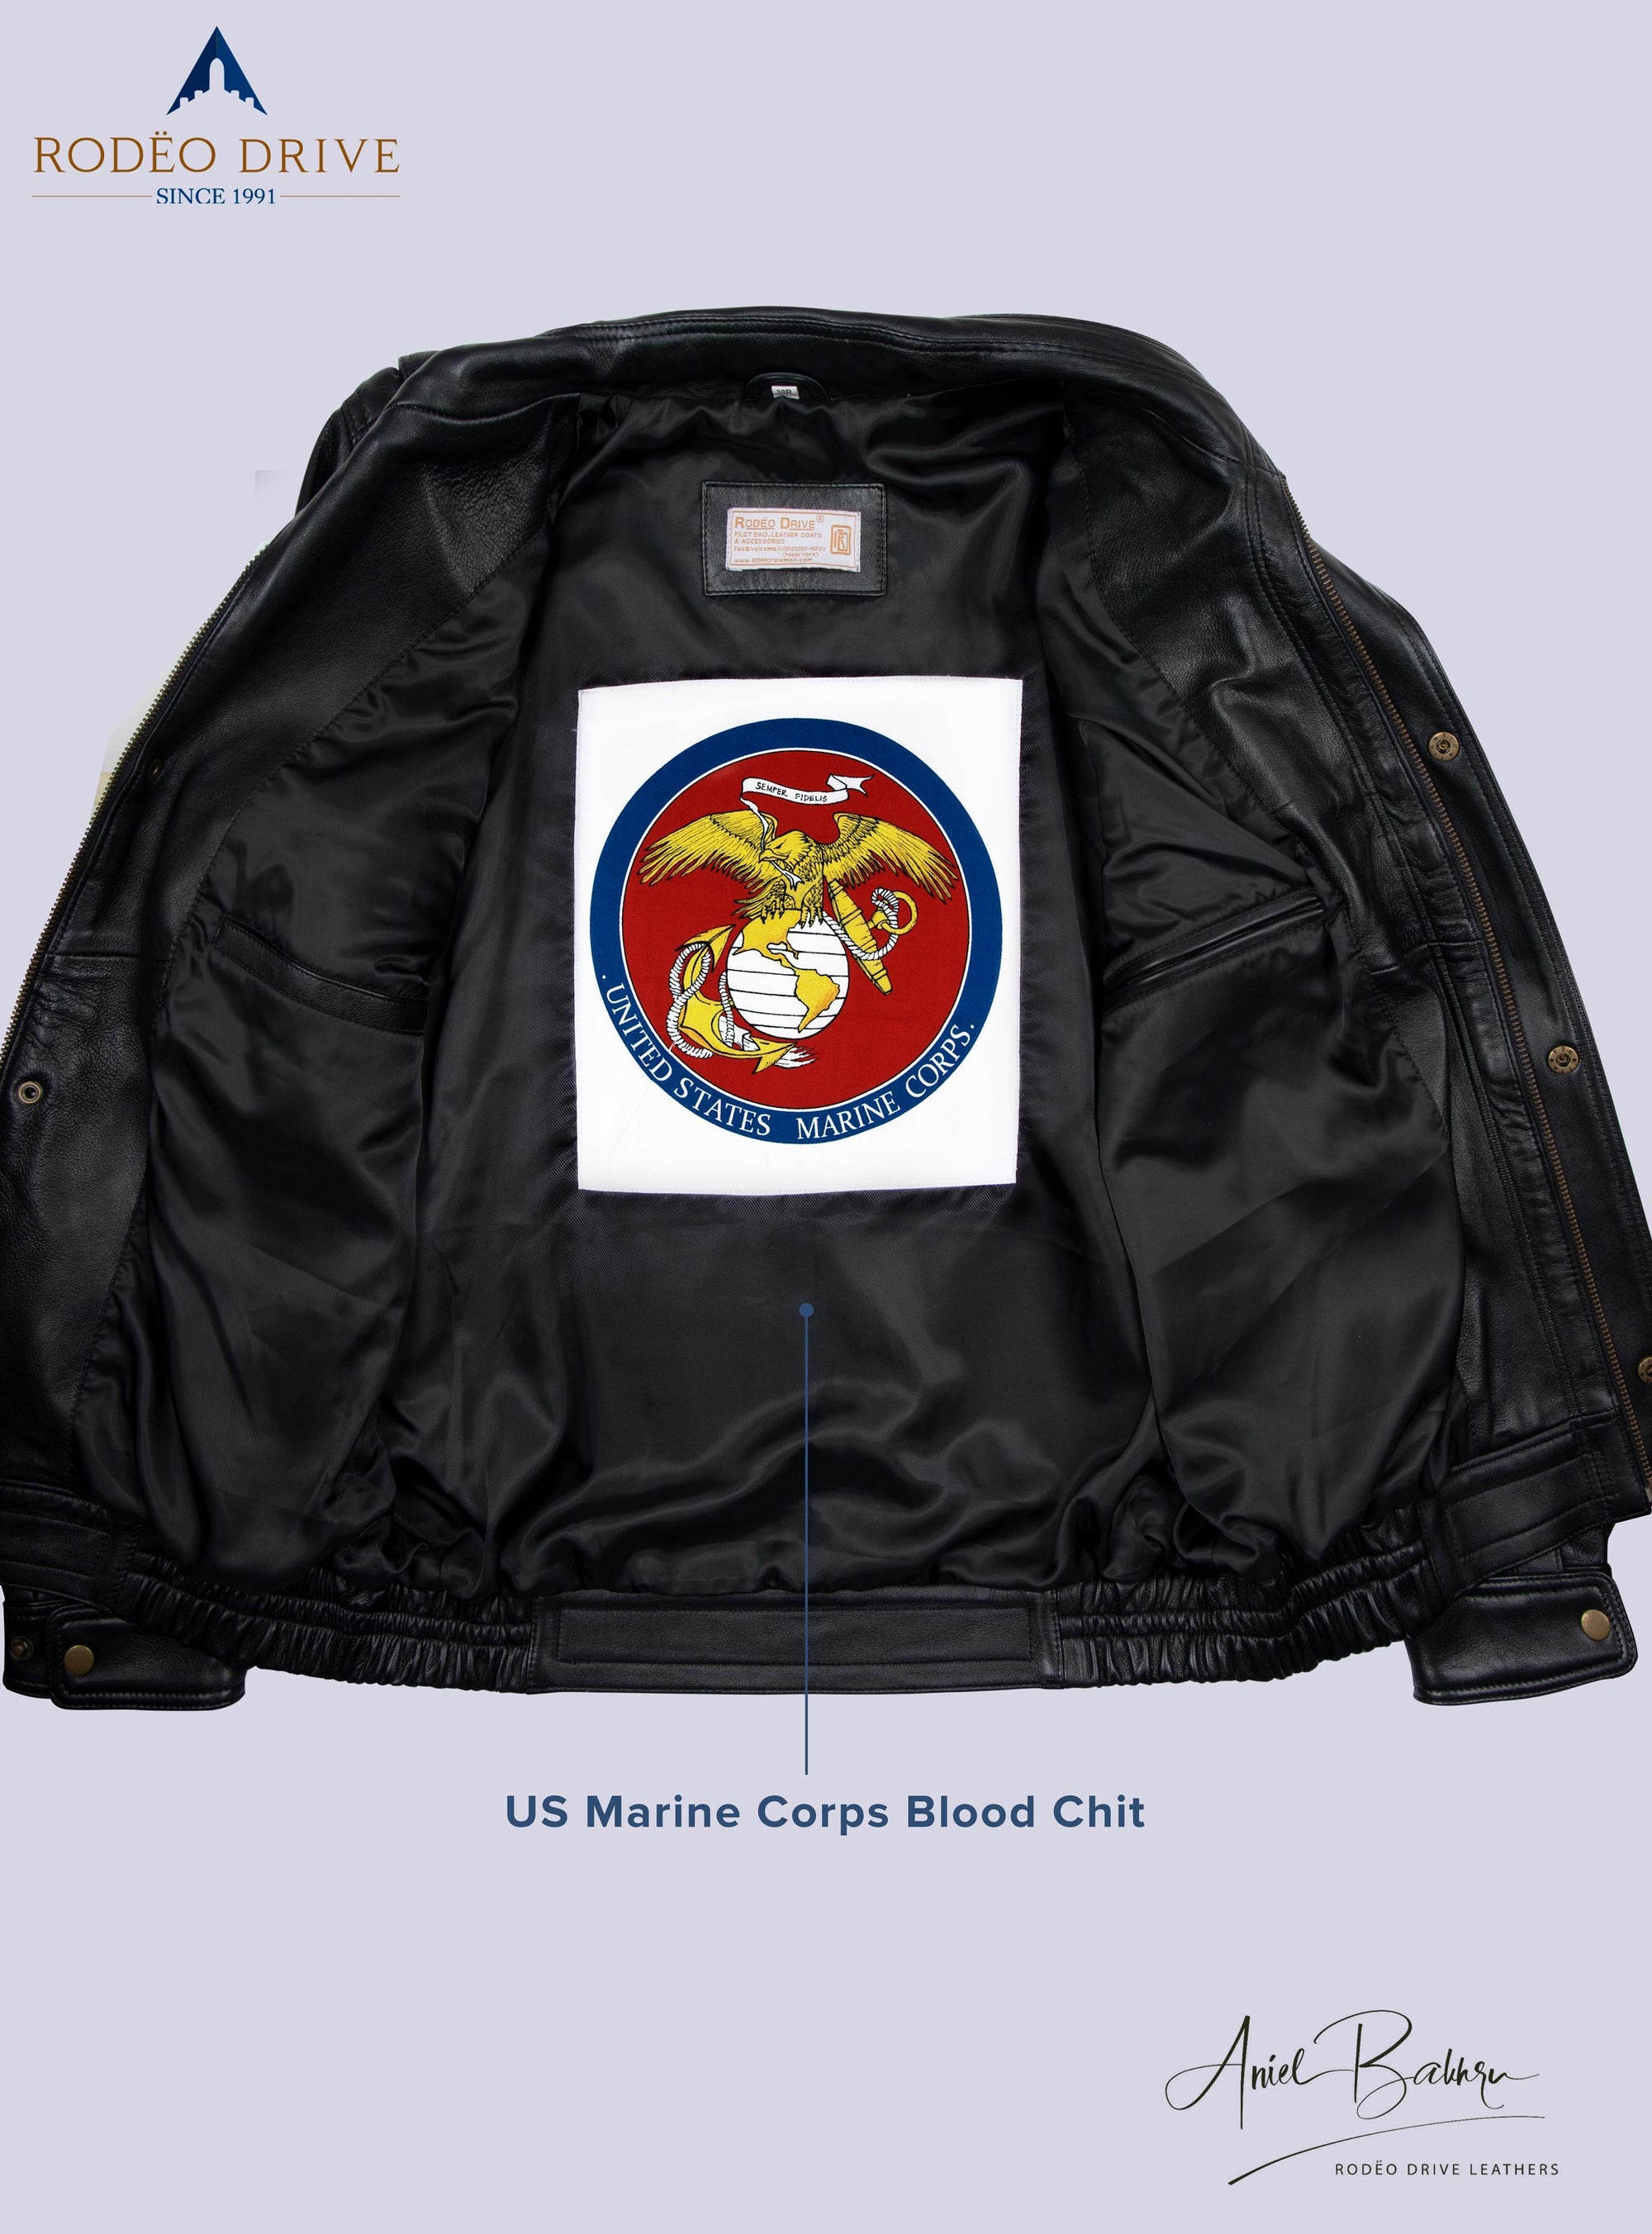 Image of inside part of Bomber short jacket,  A USA marine corps blood chit  s sewed inside.